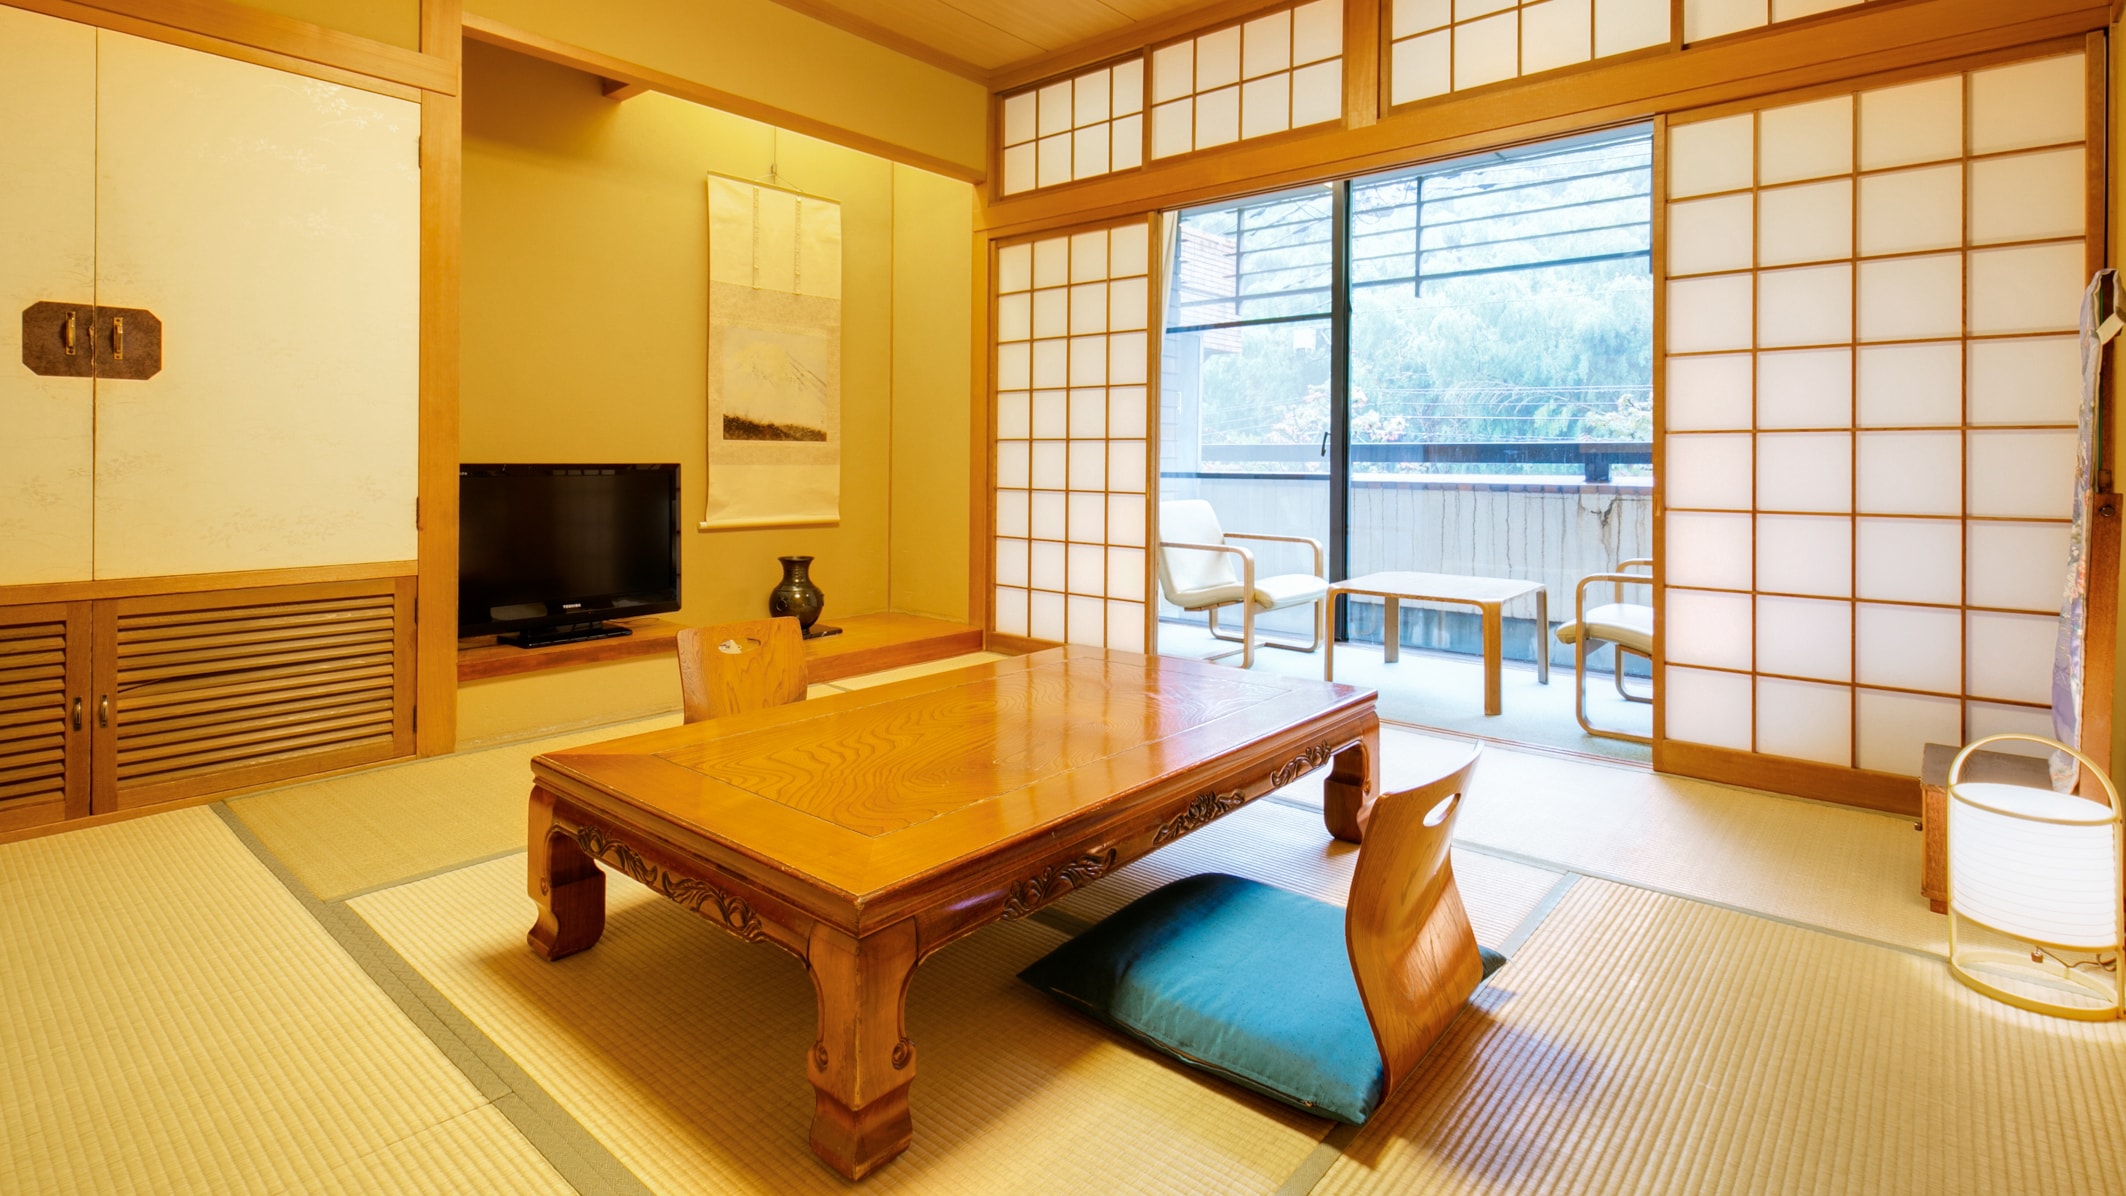 Japanese-style room with a spacious wide rim